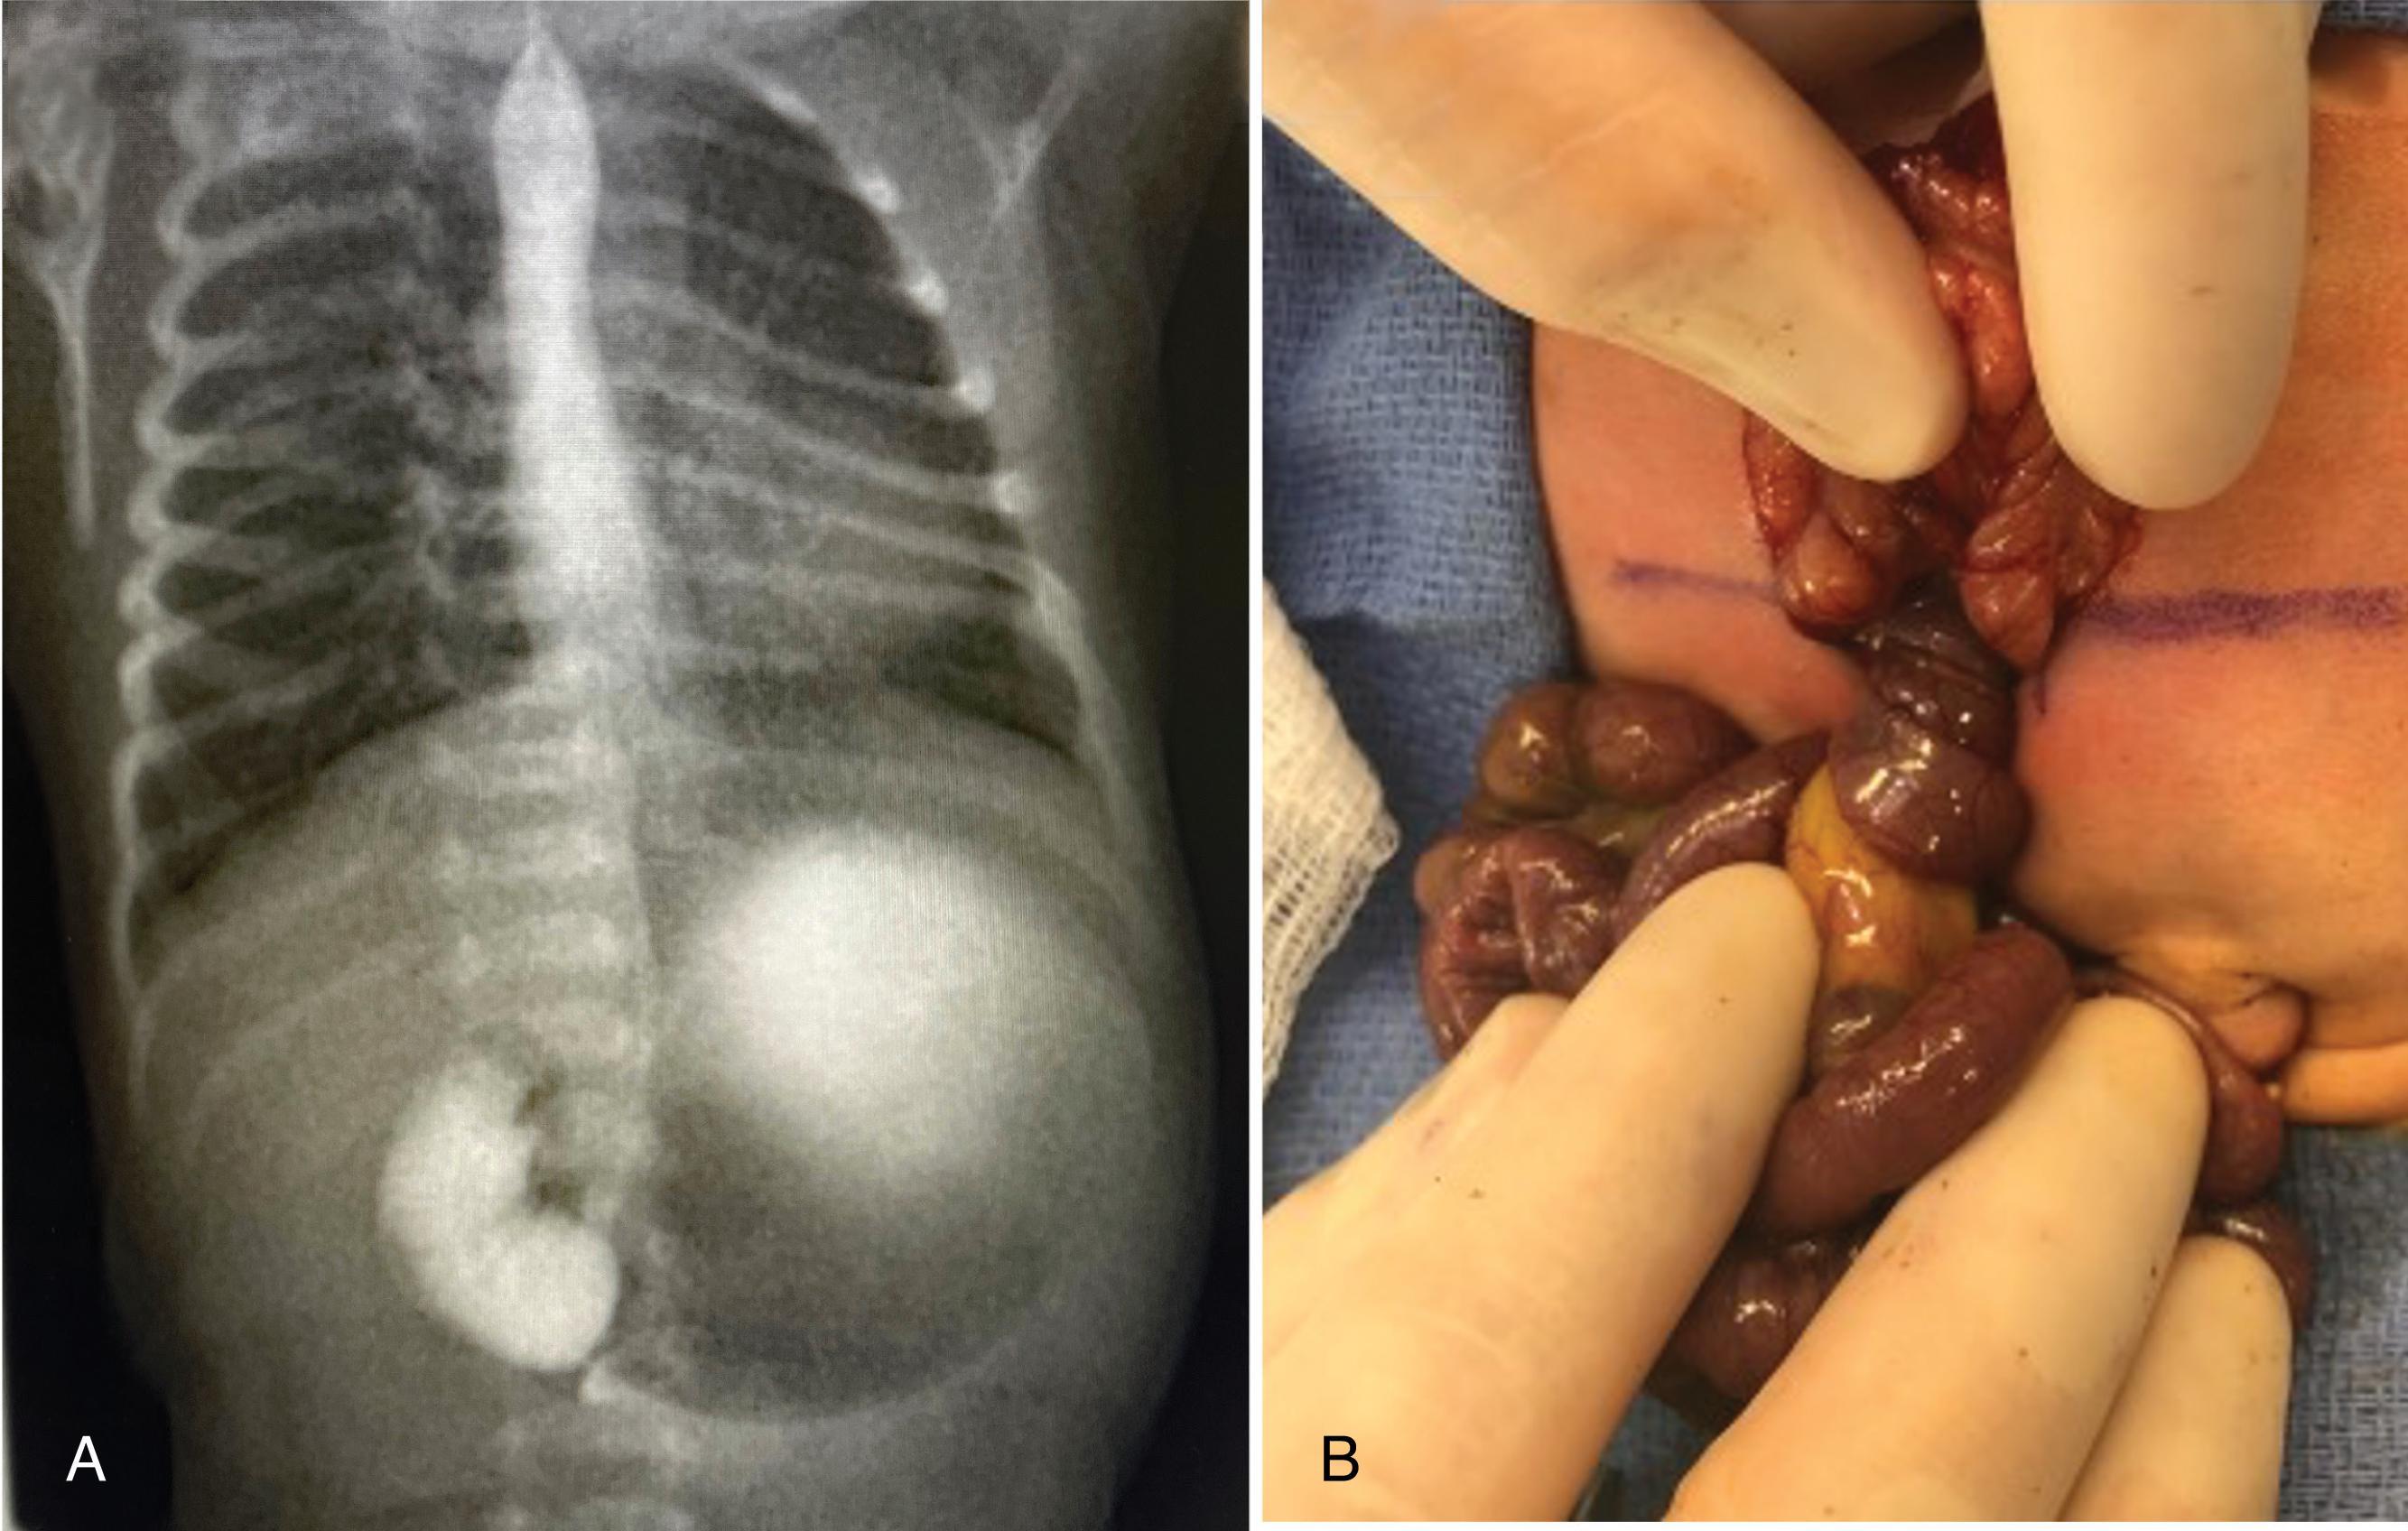 FIG. 4, Bilious emesis in a newborn identified malrotation based on an anteroposterior plain radiograph (A) showing failure of contrast progression past the midline in a dilated duodenum. (B) Intraoperative photograph at emergent laparotomy confirms malrotation with midgut volvulus.